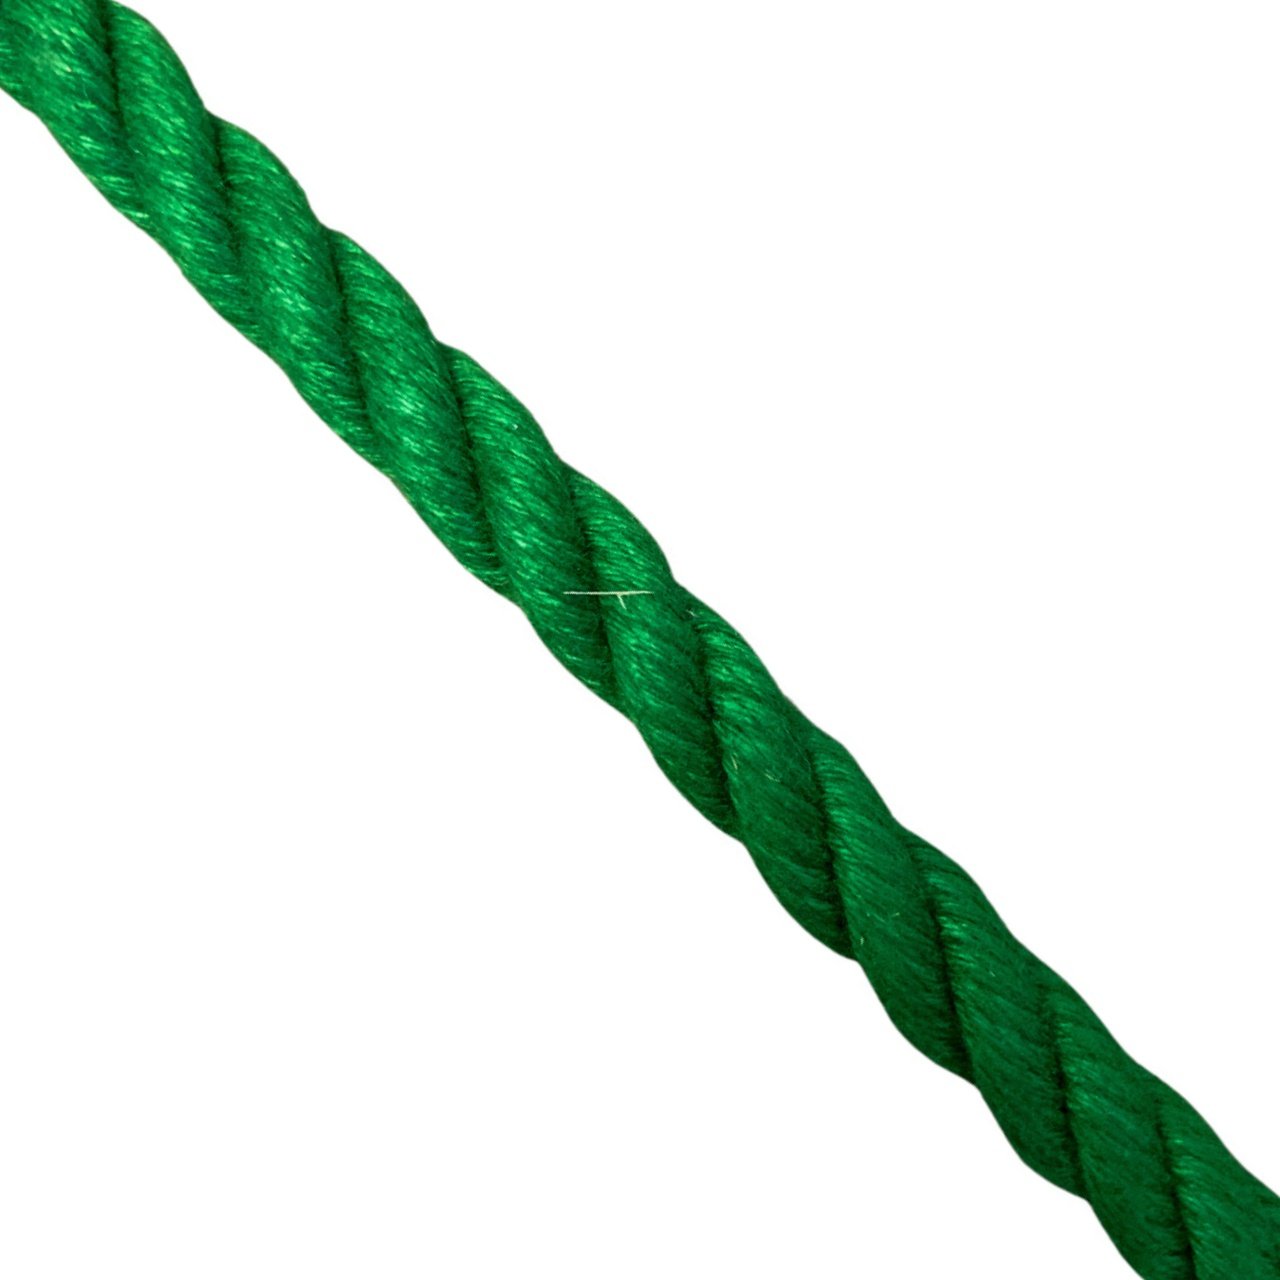 Kelly green POSH Rope Bulk by the Foot.